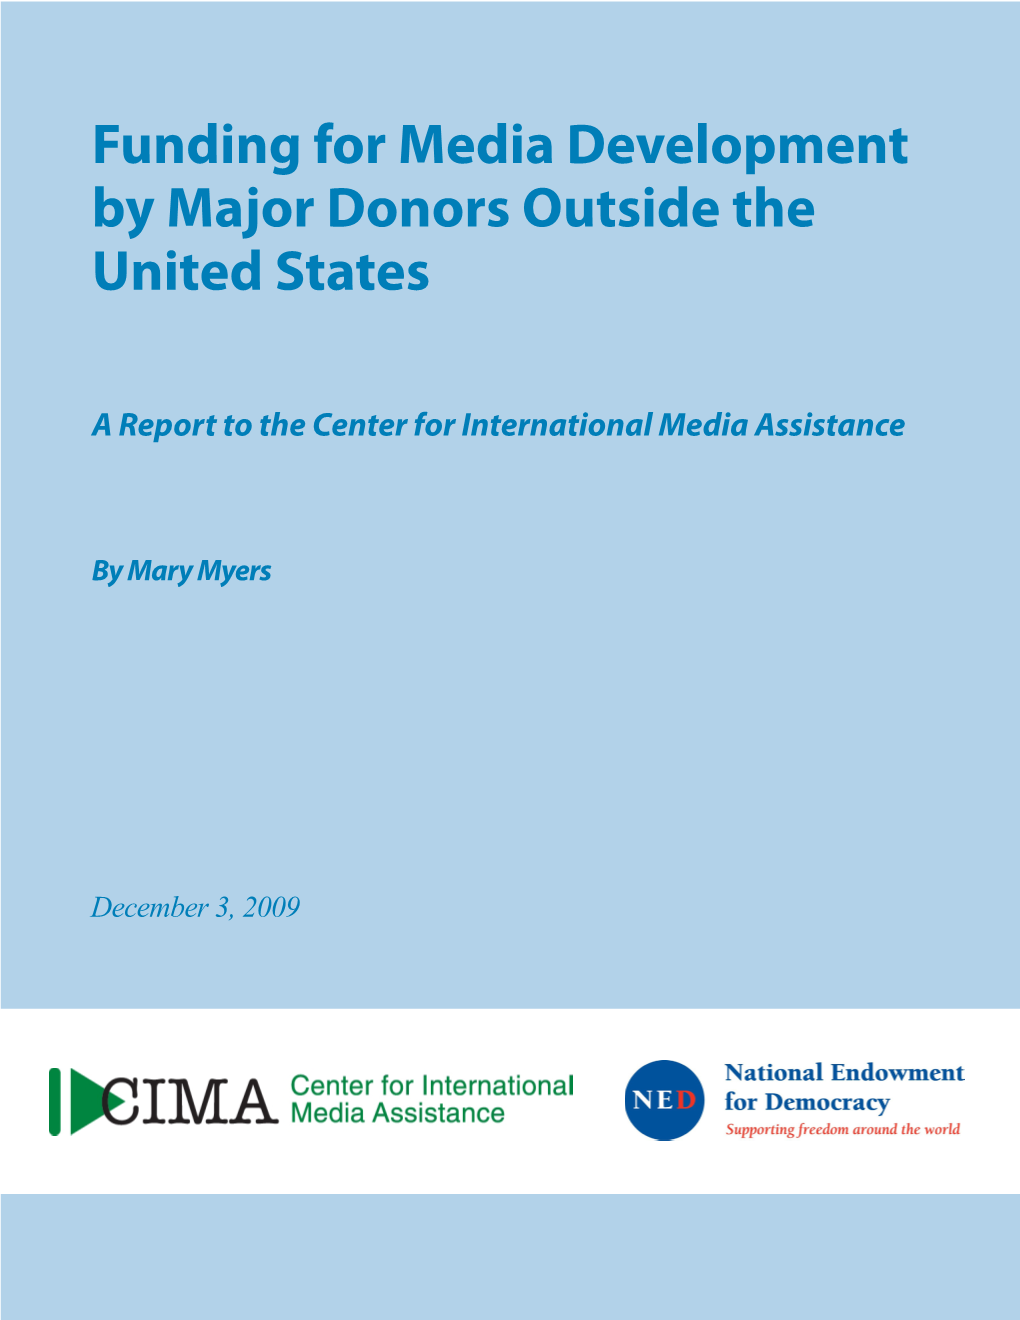 Funding for Media Development by Major Donors Outside the United States